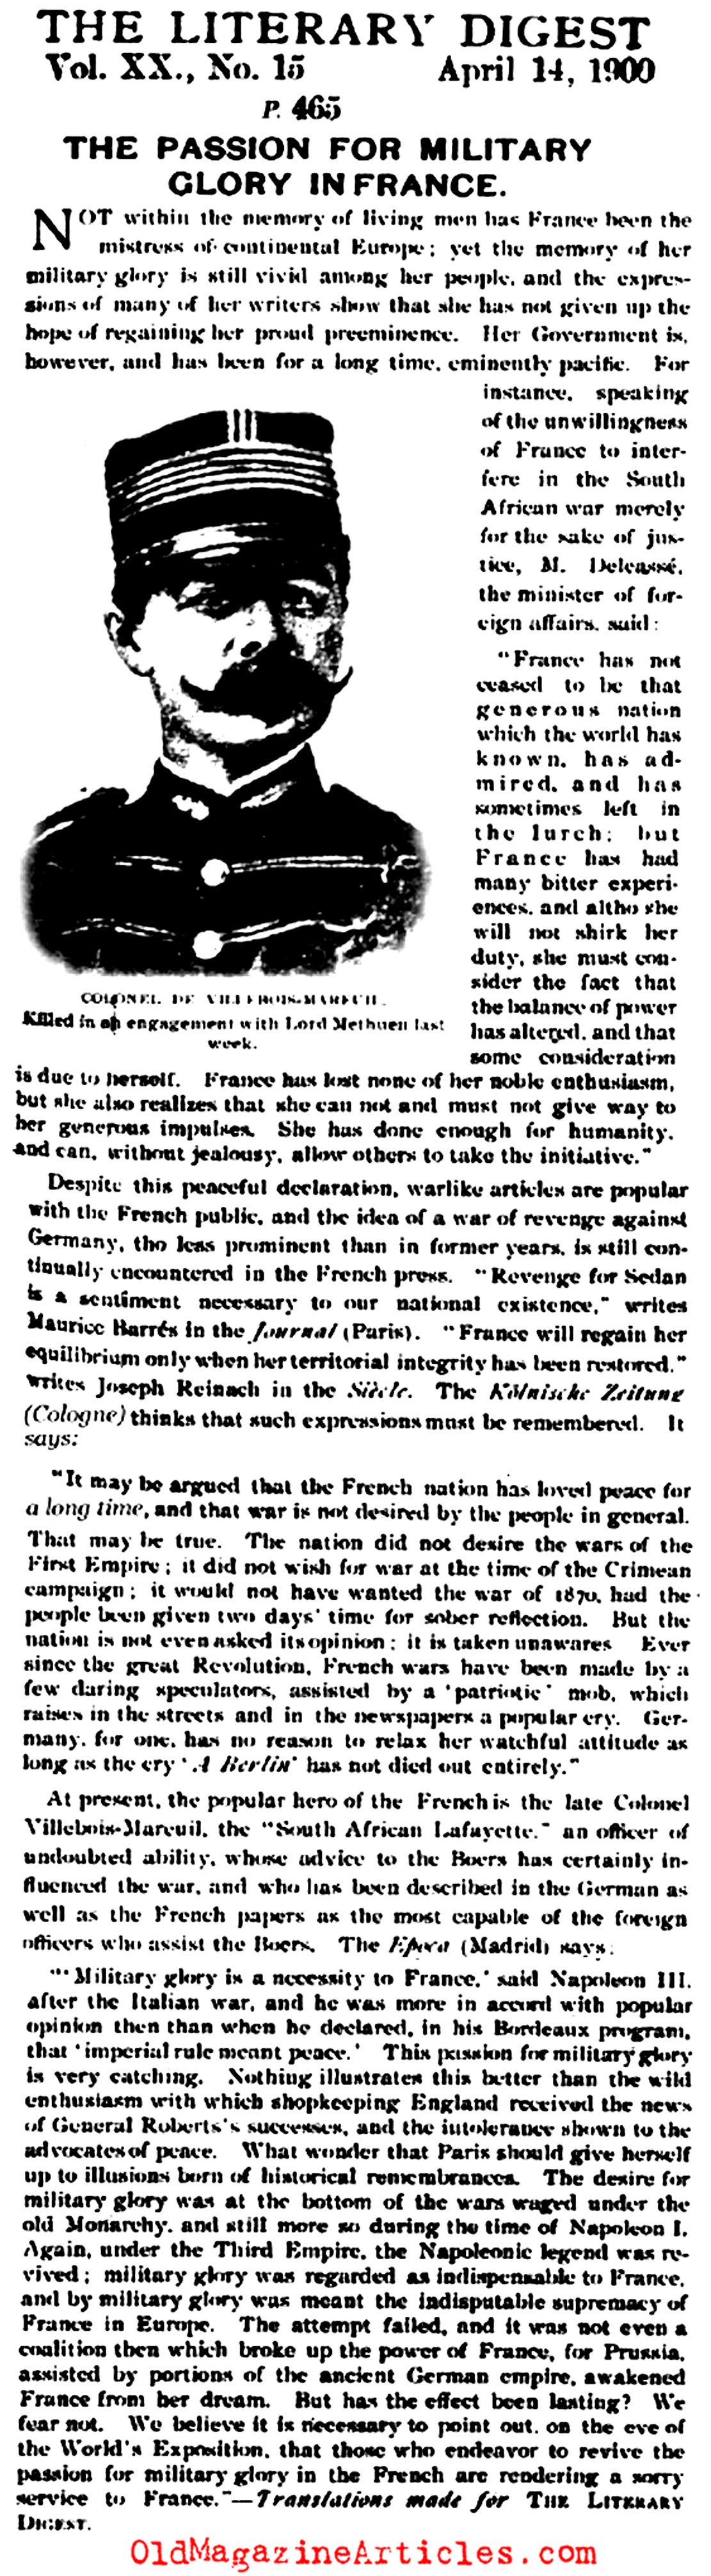 The Need for French Military Glory (Literary Digest, 1900)